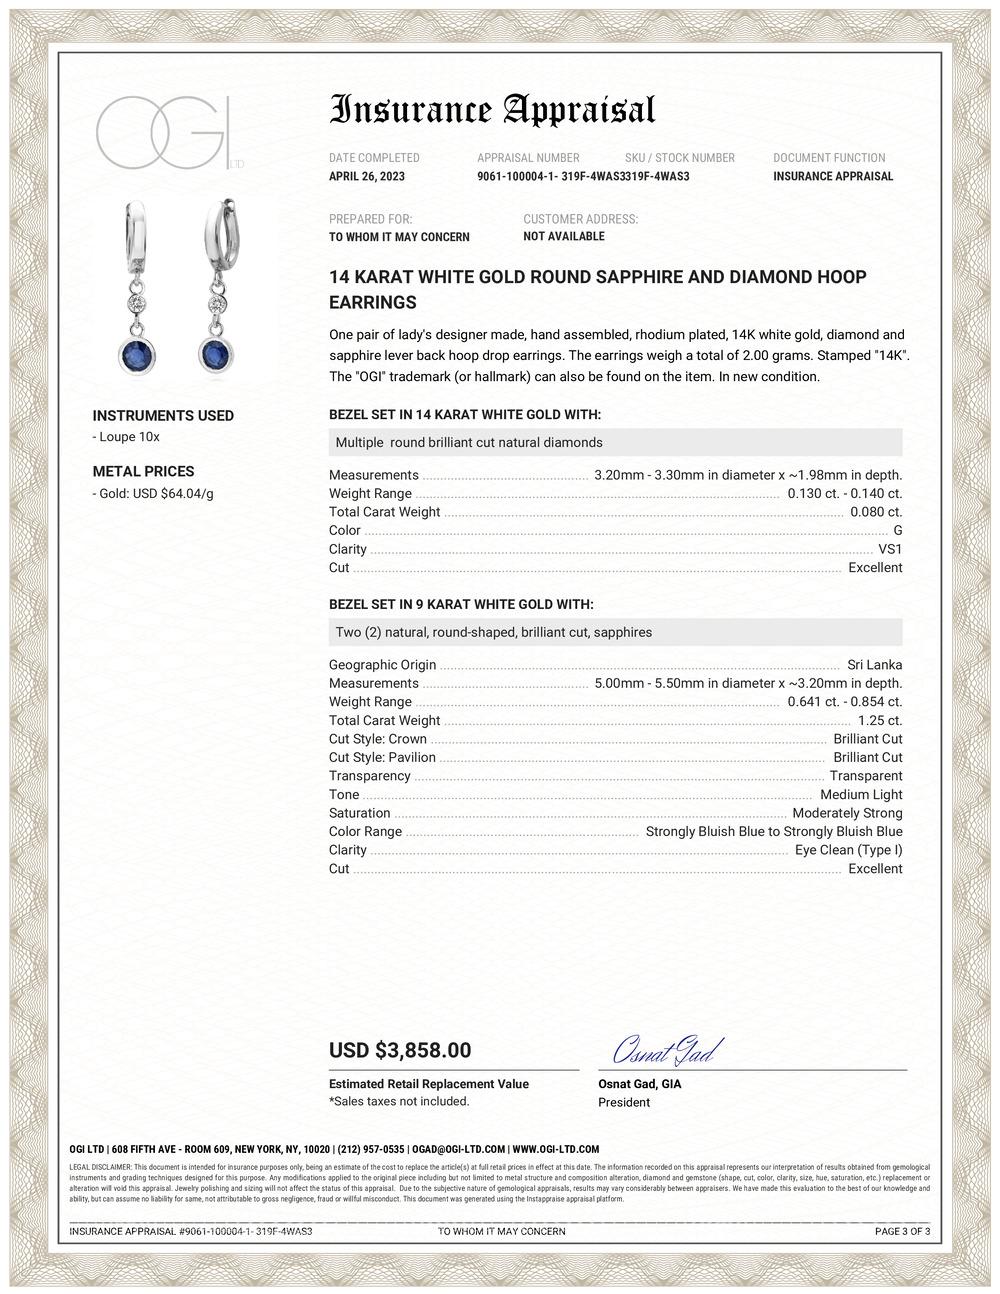 Introducing our exquisite Matched Sapphires, weighing 1.25 Carats and Two Diamonds weighing 0.10 Carat Huggie Earrings - a harmonious fusion of elegance and sophistication. These stunning earrings are designed to captivate, featuring a beautiful